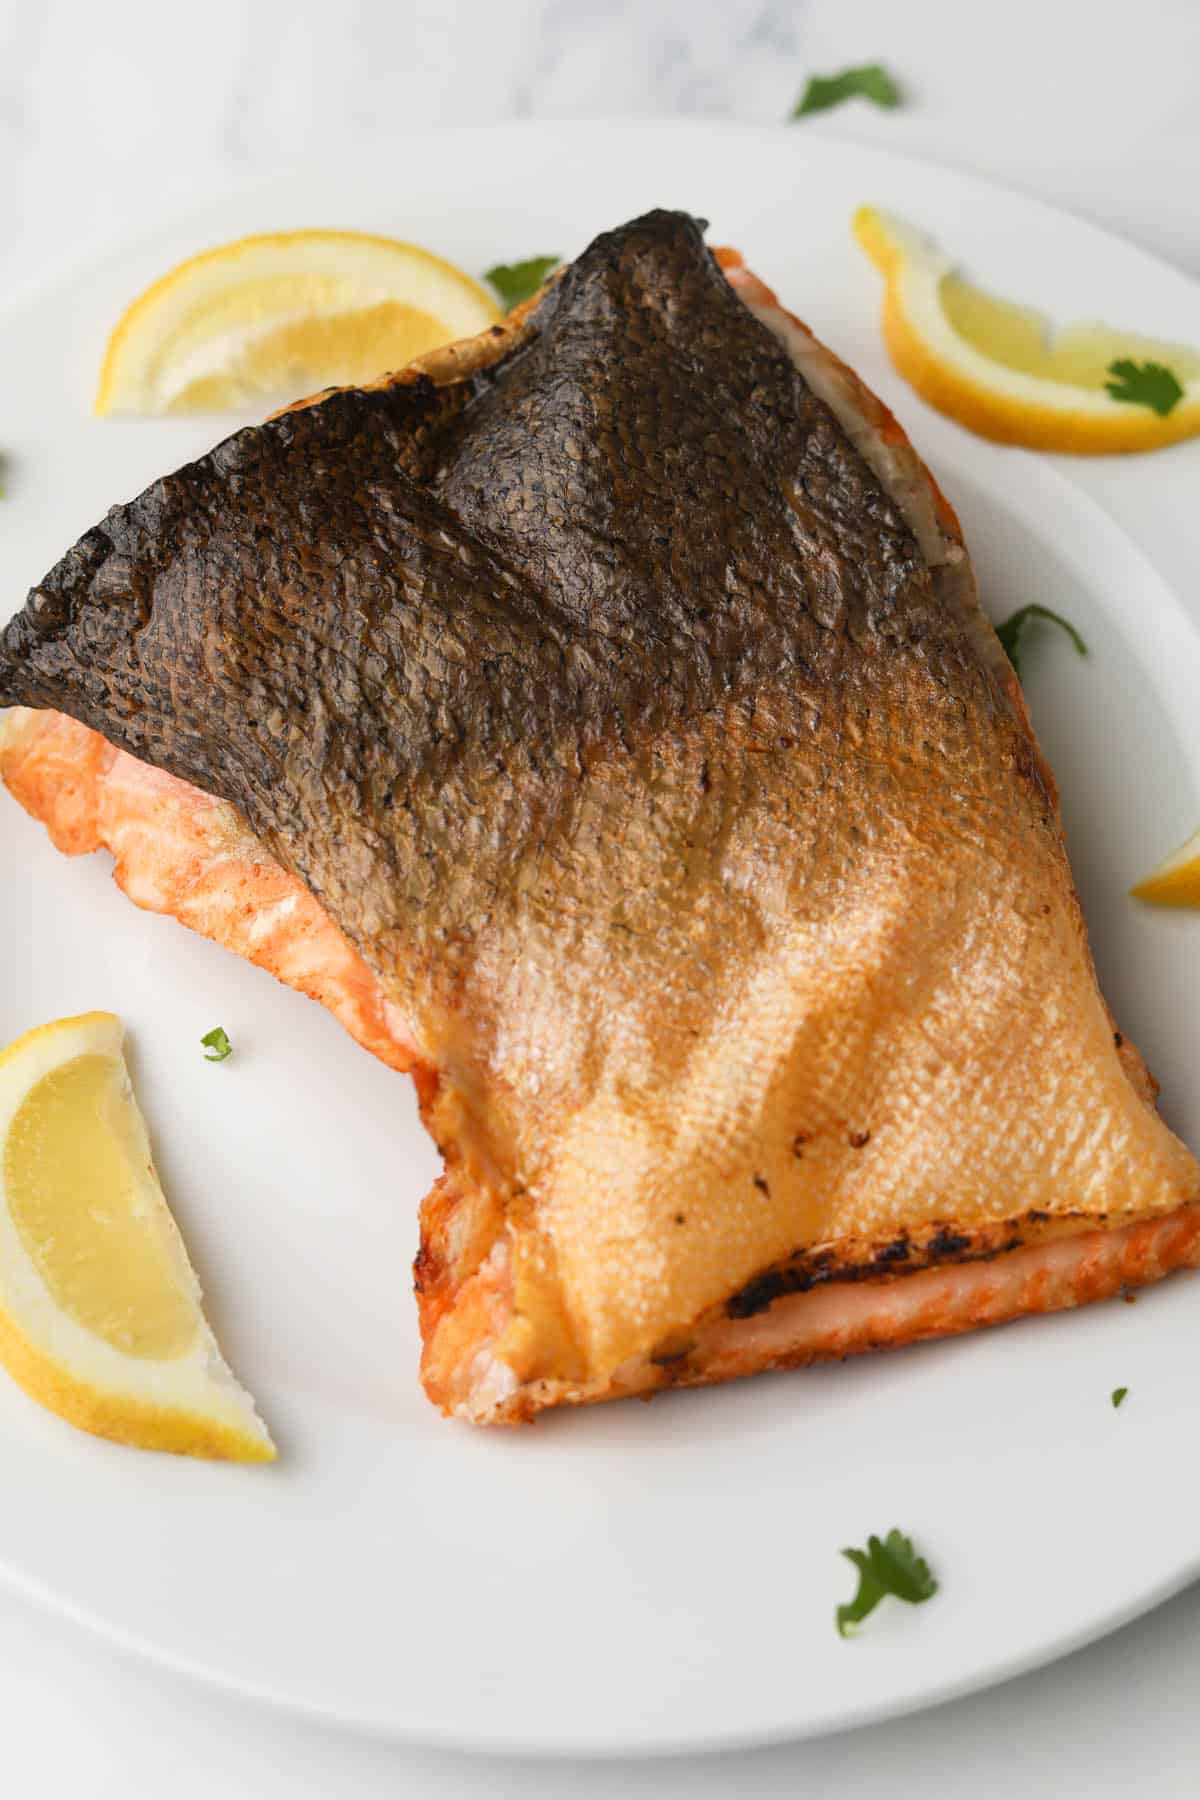 Cooked salmon filet with skin on.